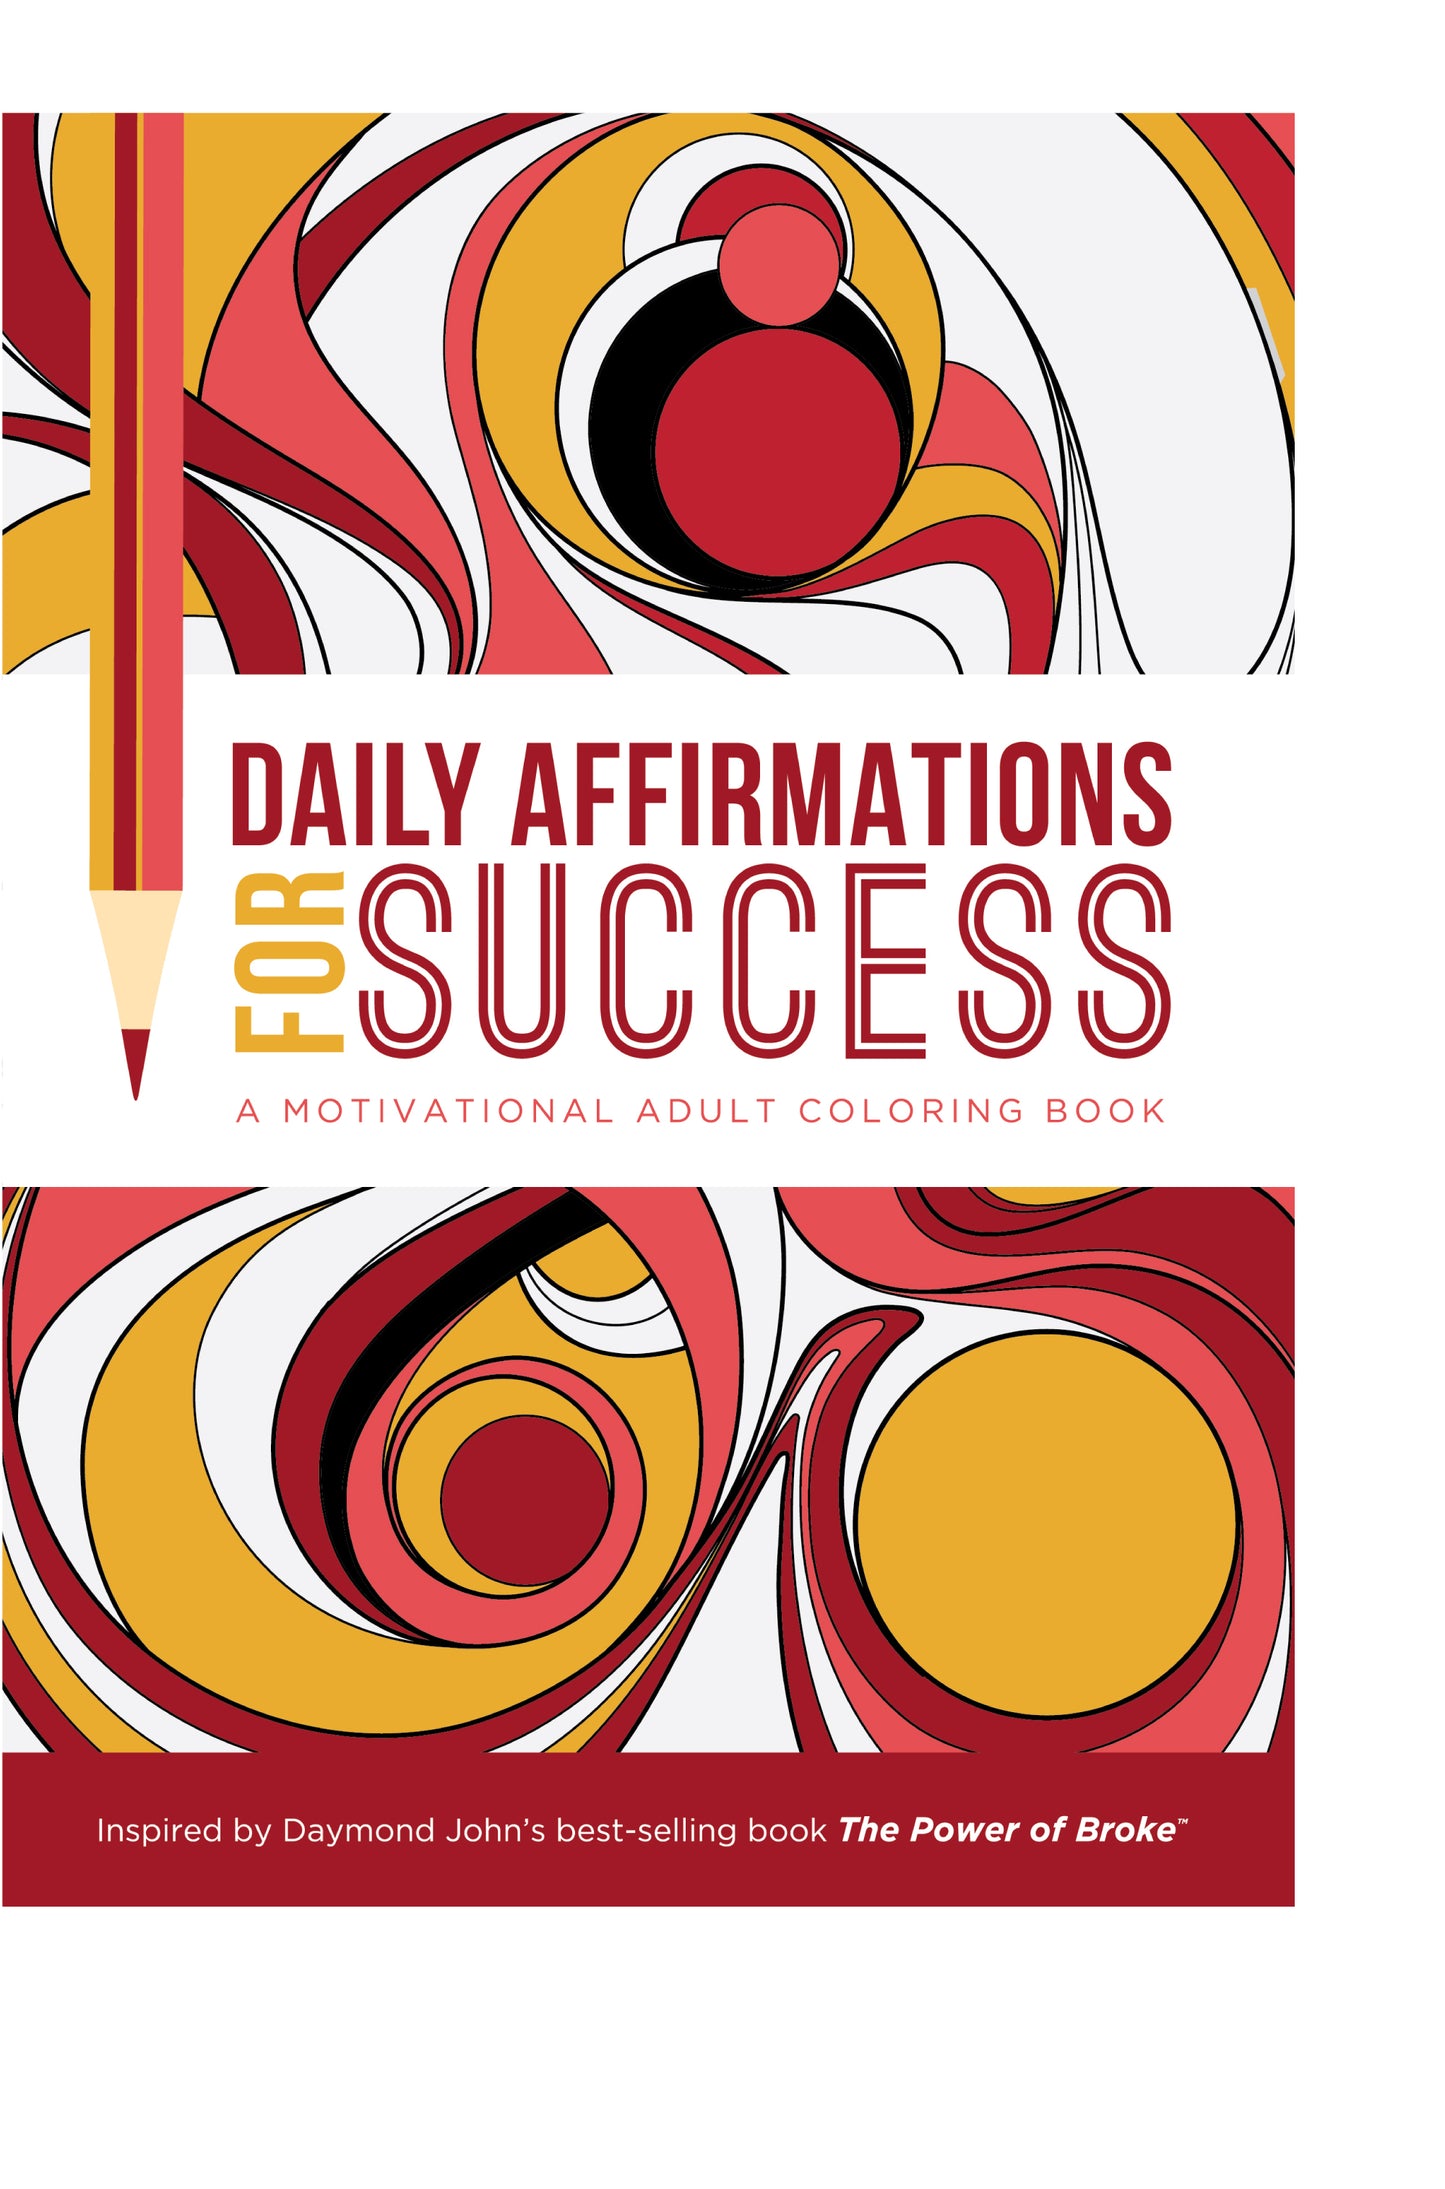 Daily Affirmations for Success: Motivational Adult Coloring Book